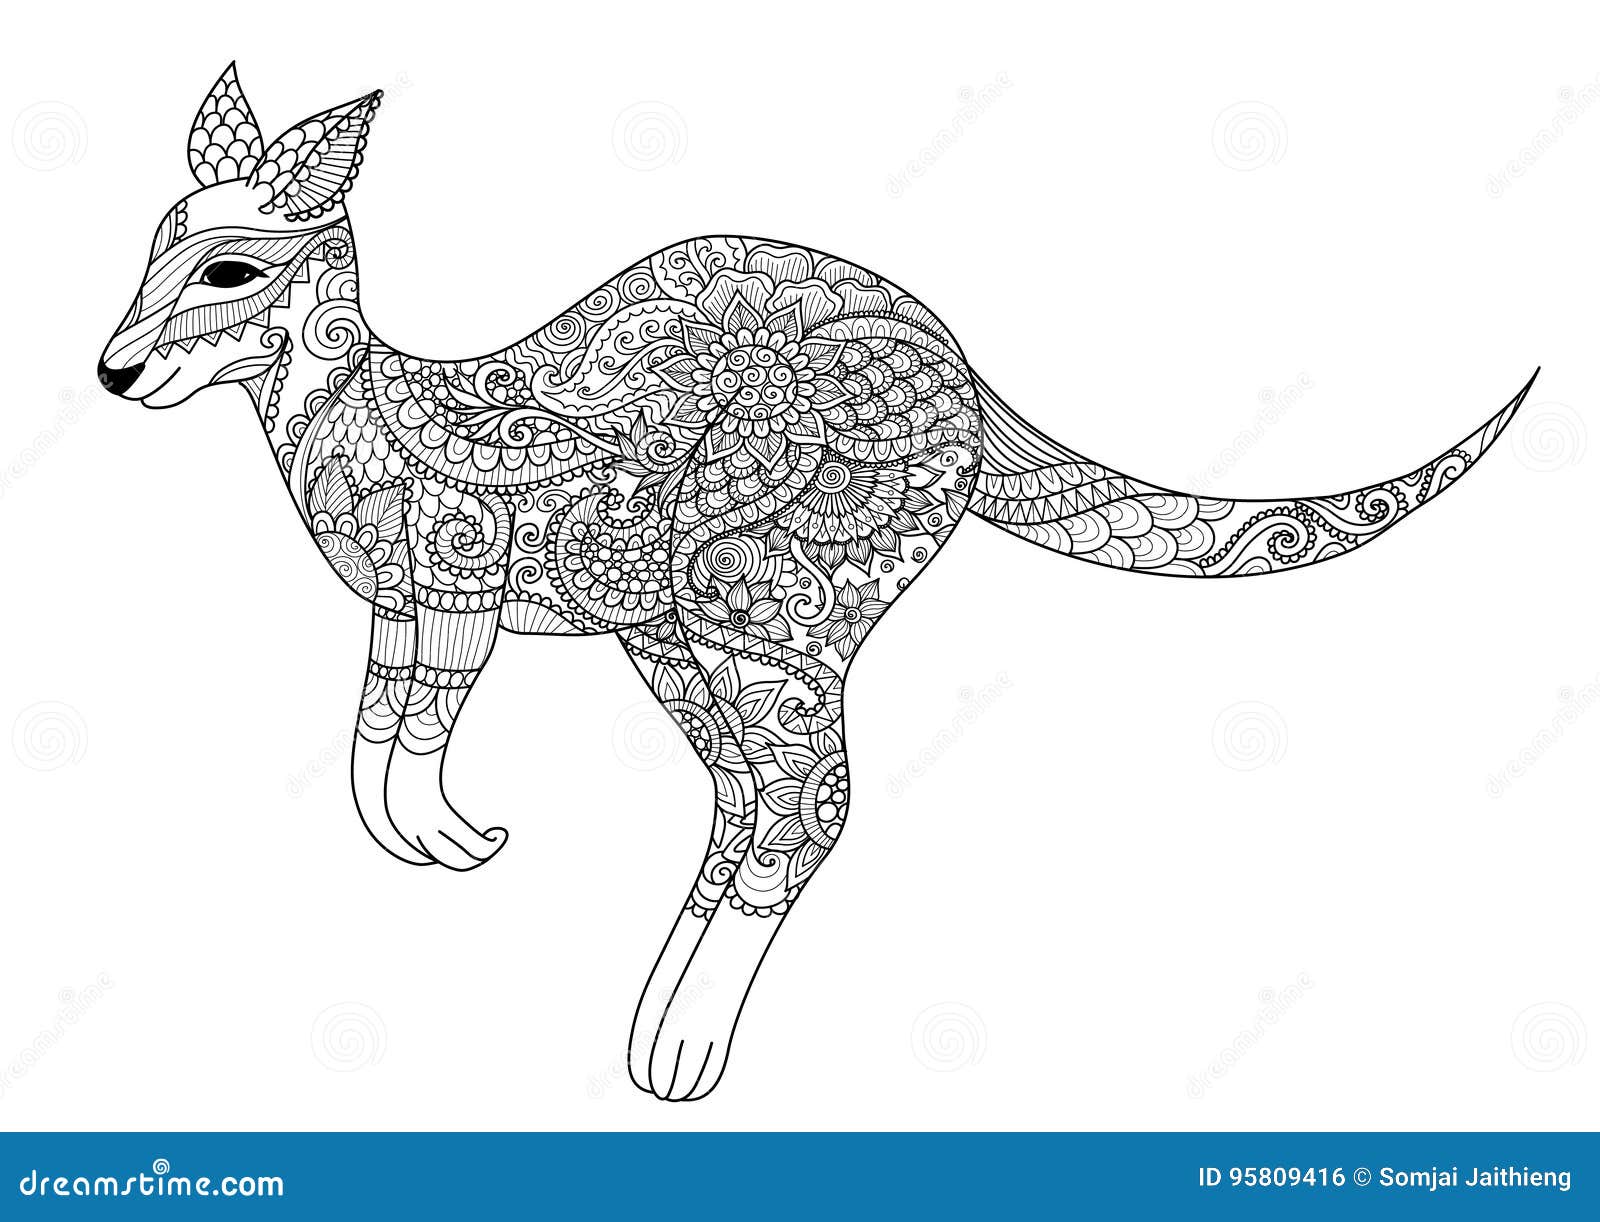 zendoodle  of jumping kangaroo for   and adult or kid coloring book page.  